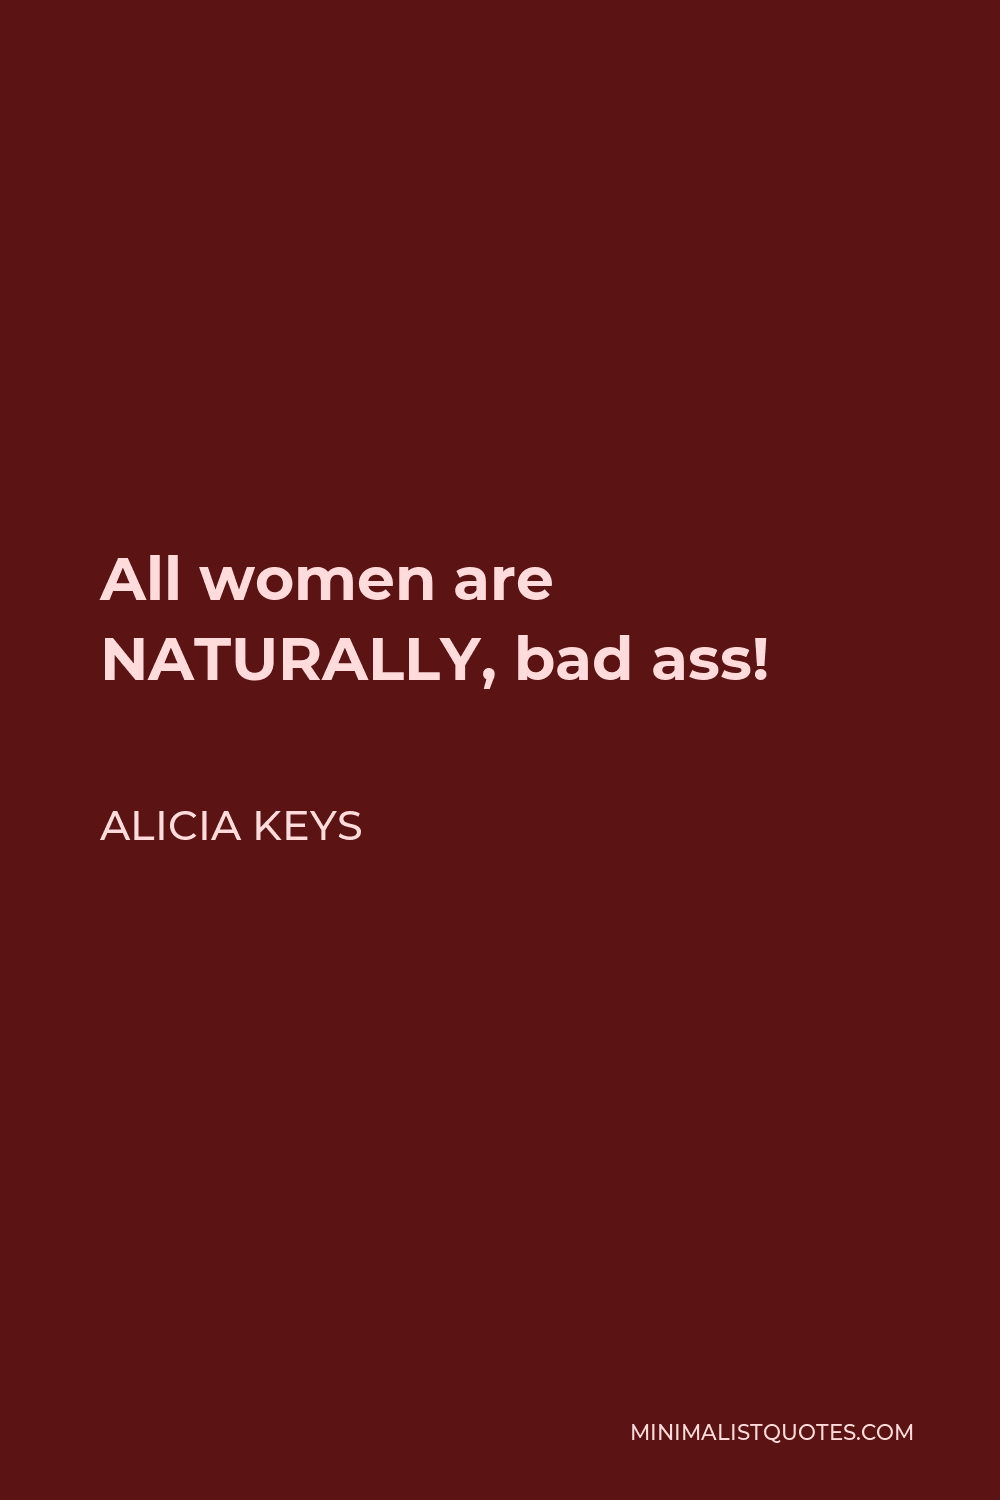 Alicia Keys Quote - All women are NATURALLY, bad ass!